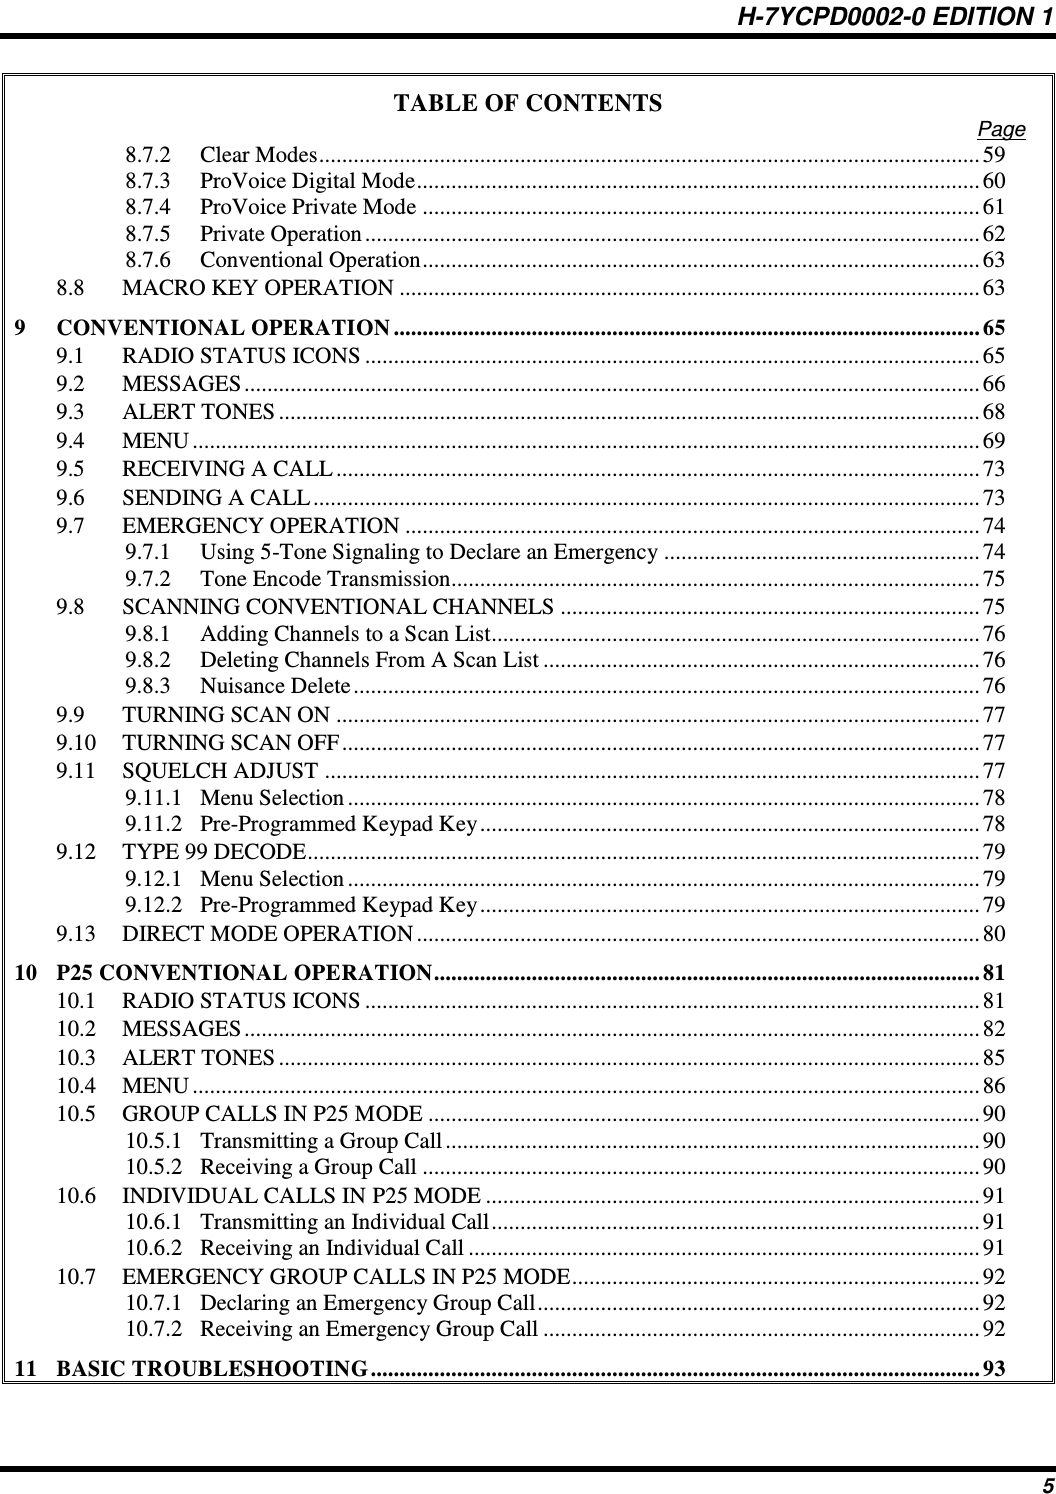 H-7YCPD0002-0 EDITION 1 5 TABLE OF CONTENTS Page 8.7.2 Clear Modes ................................................................................................................... 59 8.7.3 ProVoice Digital Mode .................................................................................................. 60 8.7.4 ProVoice Private Mode ................................................................................................. 61 8.7.5 Private Operation ........................................................................................................... 62 8.7.6 Conventional Operation ................................................................................................. 63 8.8 MACRO KEY OPERATION ..................................................................................................... 63 9 CONVENTIONAL OPERATION ...................................................................................................... 65 9.1 RADIO STATUS ICONS ........................................................................................................... 65 9.2 MESSAGES ................................................................................................................................ 66 9.3 ALERT TONES .......................................................................................................................... 68 9.4 MENU ......................................................................................................................................... 69 9.5 RECEIVING A CALL ................................................................................................................ 73 9.6 SENDING A CALL .................................................................................................................... 73 9.7 EMERGENCY OPERATION .................................................................................................... 74 9.7.1 Using 5-Tone Signaling to Declare an Emergency ....................................................... 74 9.7.2 Tone Encode Transmission............................................................................................ 75 9.8 SCANNING CONVENTIONAL CHANNELS ......................................................................... 75 9.8.1 Adding Channels to a Scan List..................................................................................... 76 9.8.2 Deleting Channels From A Scan List ............................................................................ 76 9.8.3 Nuisance Delete ............................................................................................................. 76 9.9 TURNING SCAN ON ................................................................................................................ 77 9.10 TURNING SCAN OFF ............................................................................................................... 77 9.11 SQUELCH ADJUST .................................................................................................................. 77 9.11.1 Menu Selection .............................................................................................................. 78 9.11.2 Pre-Programmed Keypad Key ....................................................................................... 78 9.12 TYPE 99 DECODE ..................................................................................................................... 79 9.12.1 Menu Selection .............................................................................................................. 79 9.12.2 Pre-Programmed Keypad Key ....................................................................................... 79 9.13 DIRECT MODE OPERATION .................................................................................................. 80 10 P25 CONVENTIONAL OPERATION ............................................................................................... 81 10.1 RADIO STATUS ICONS ........................................................................................................... 81 10.2 MESSAGES ................................................................................................................................ 82 10.3 ALERT TONES .......................................................................................................................... 85 10.4 MENU ......................................................................................................................................... 86 10.5 GROUP CALLS IN P25 MODE ................................................................................................ 90 10.5.1 Transmitting a Group Call ............................................................................................. 90 10.5.2 Receiving a Group Call ................................................................................................. 90 10.6 INDIVIDUAL CALLS IN P25 MODE ...................................................................................... 91 10.6.1 Transmitting an Individual Call ..................................................................................... 91 10.6.2 Receiving an Individual Call ......................................................................................... 91 10.7 EMERGENCY GROUP CALLS IN P25 MODE ....................................................................... 92 10.7.1 Declaring an Emergency Group Call ............................................................................. 92 10.7.2 Receiving an Emergency Group Call ............................................................................ 92 11 BASIC TROUBLESHOOTING .......................................................................................................... 93 